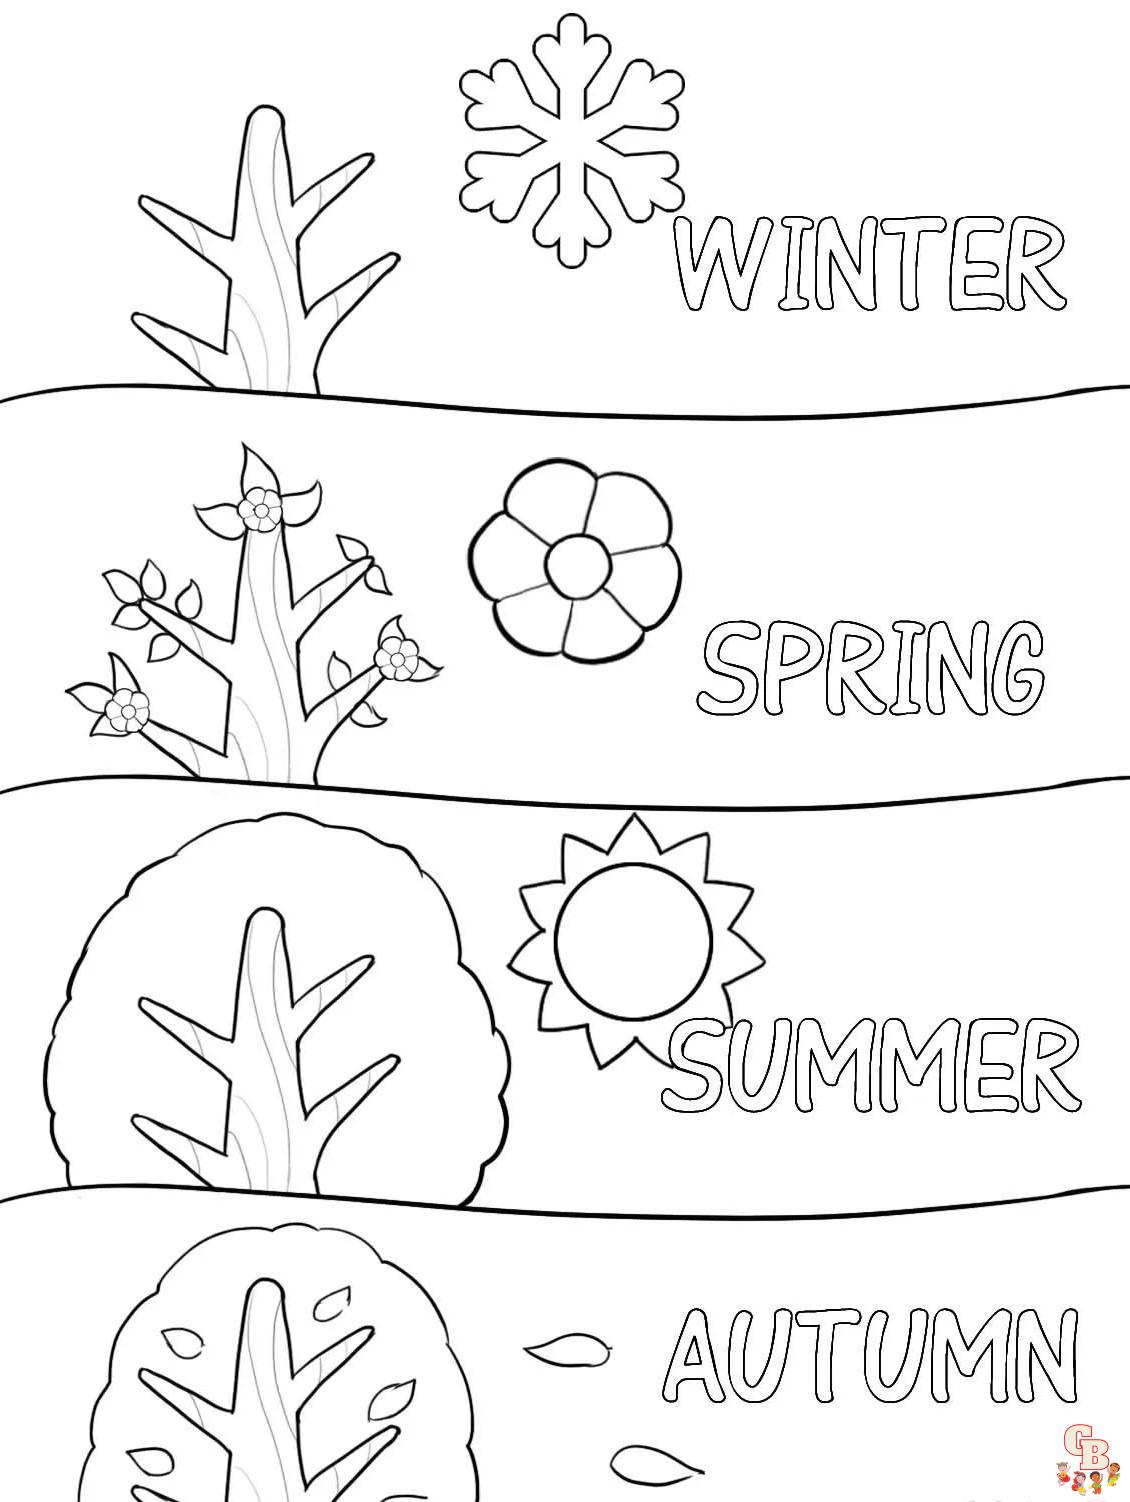 Seasons Coloring Pages 7